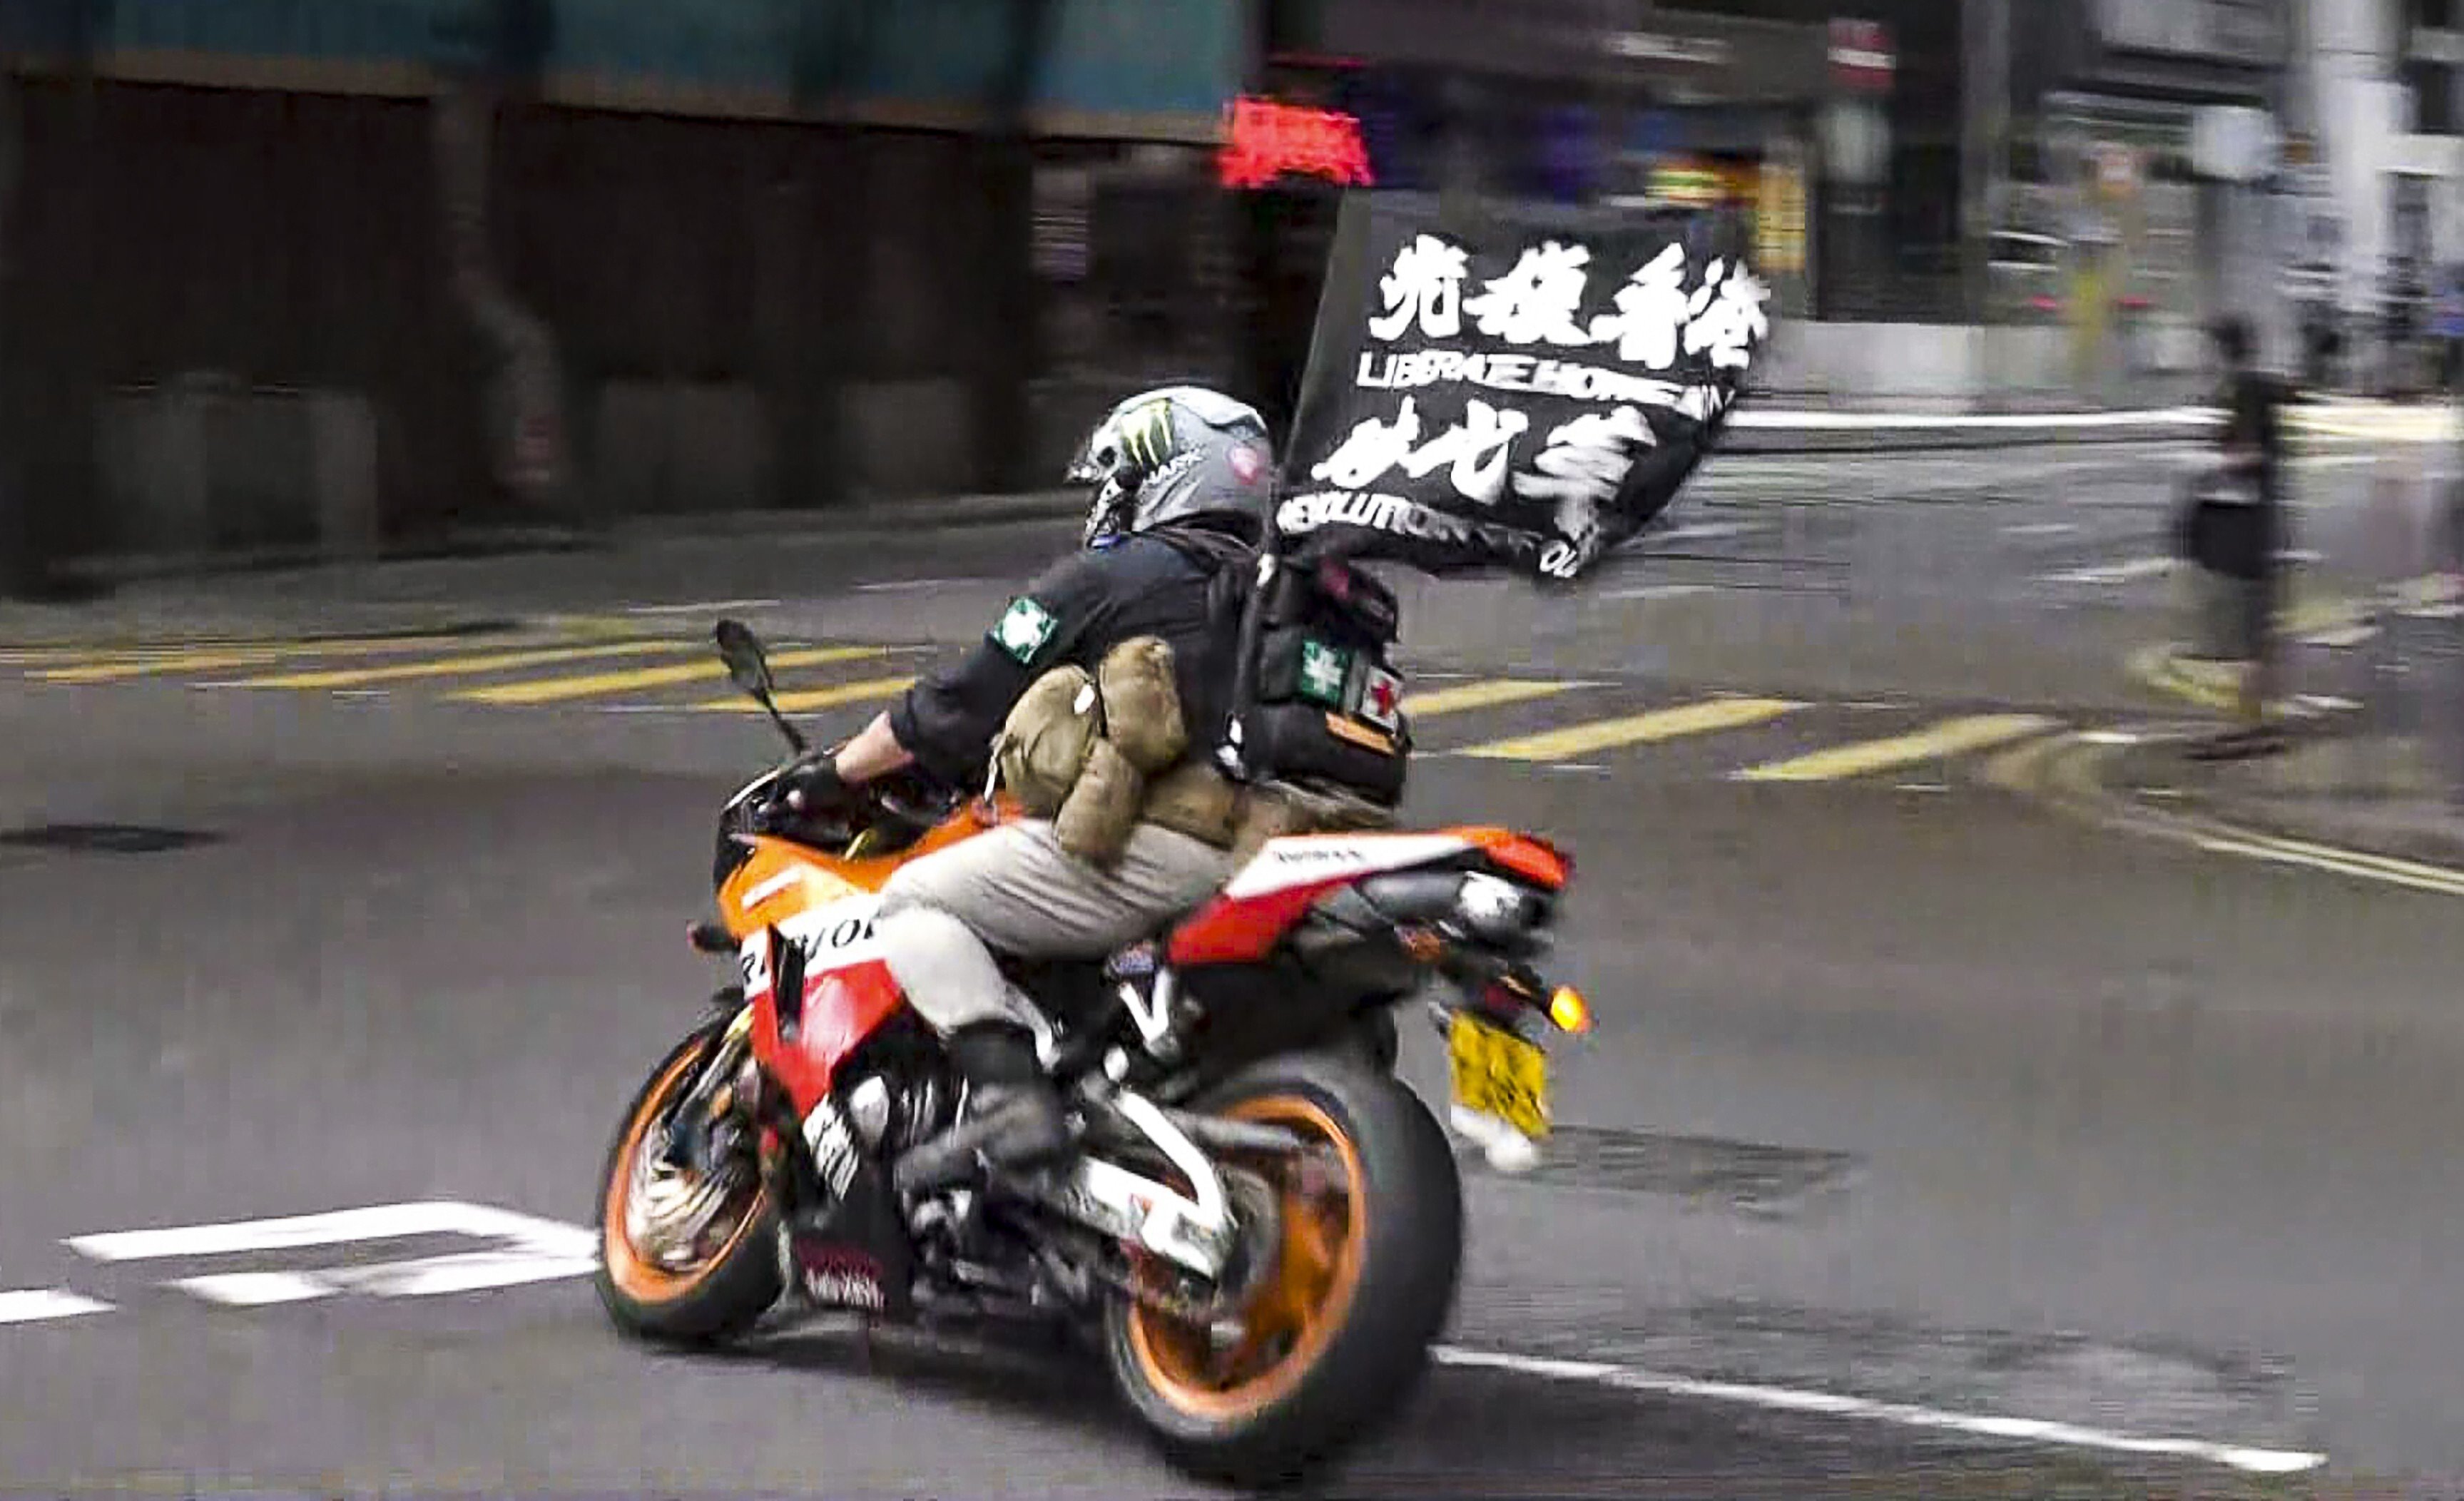 Leon Tong rode his motorcycle into police officers during a July 1 rally last year. Photo: NowTV News